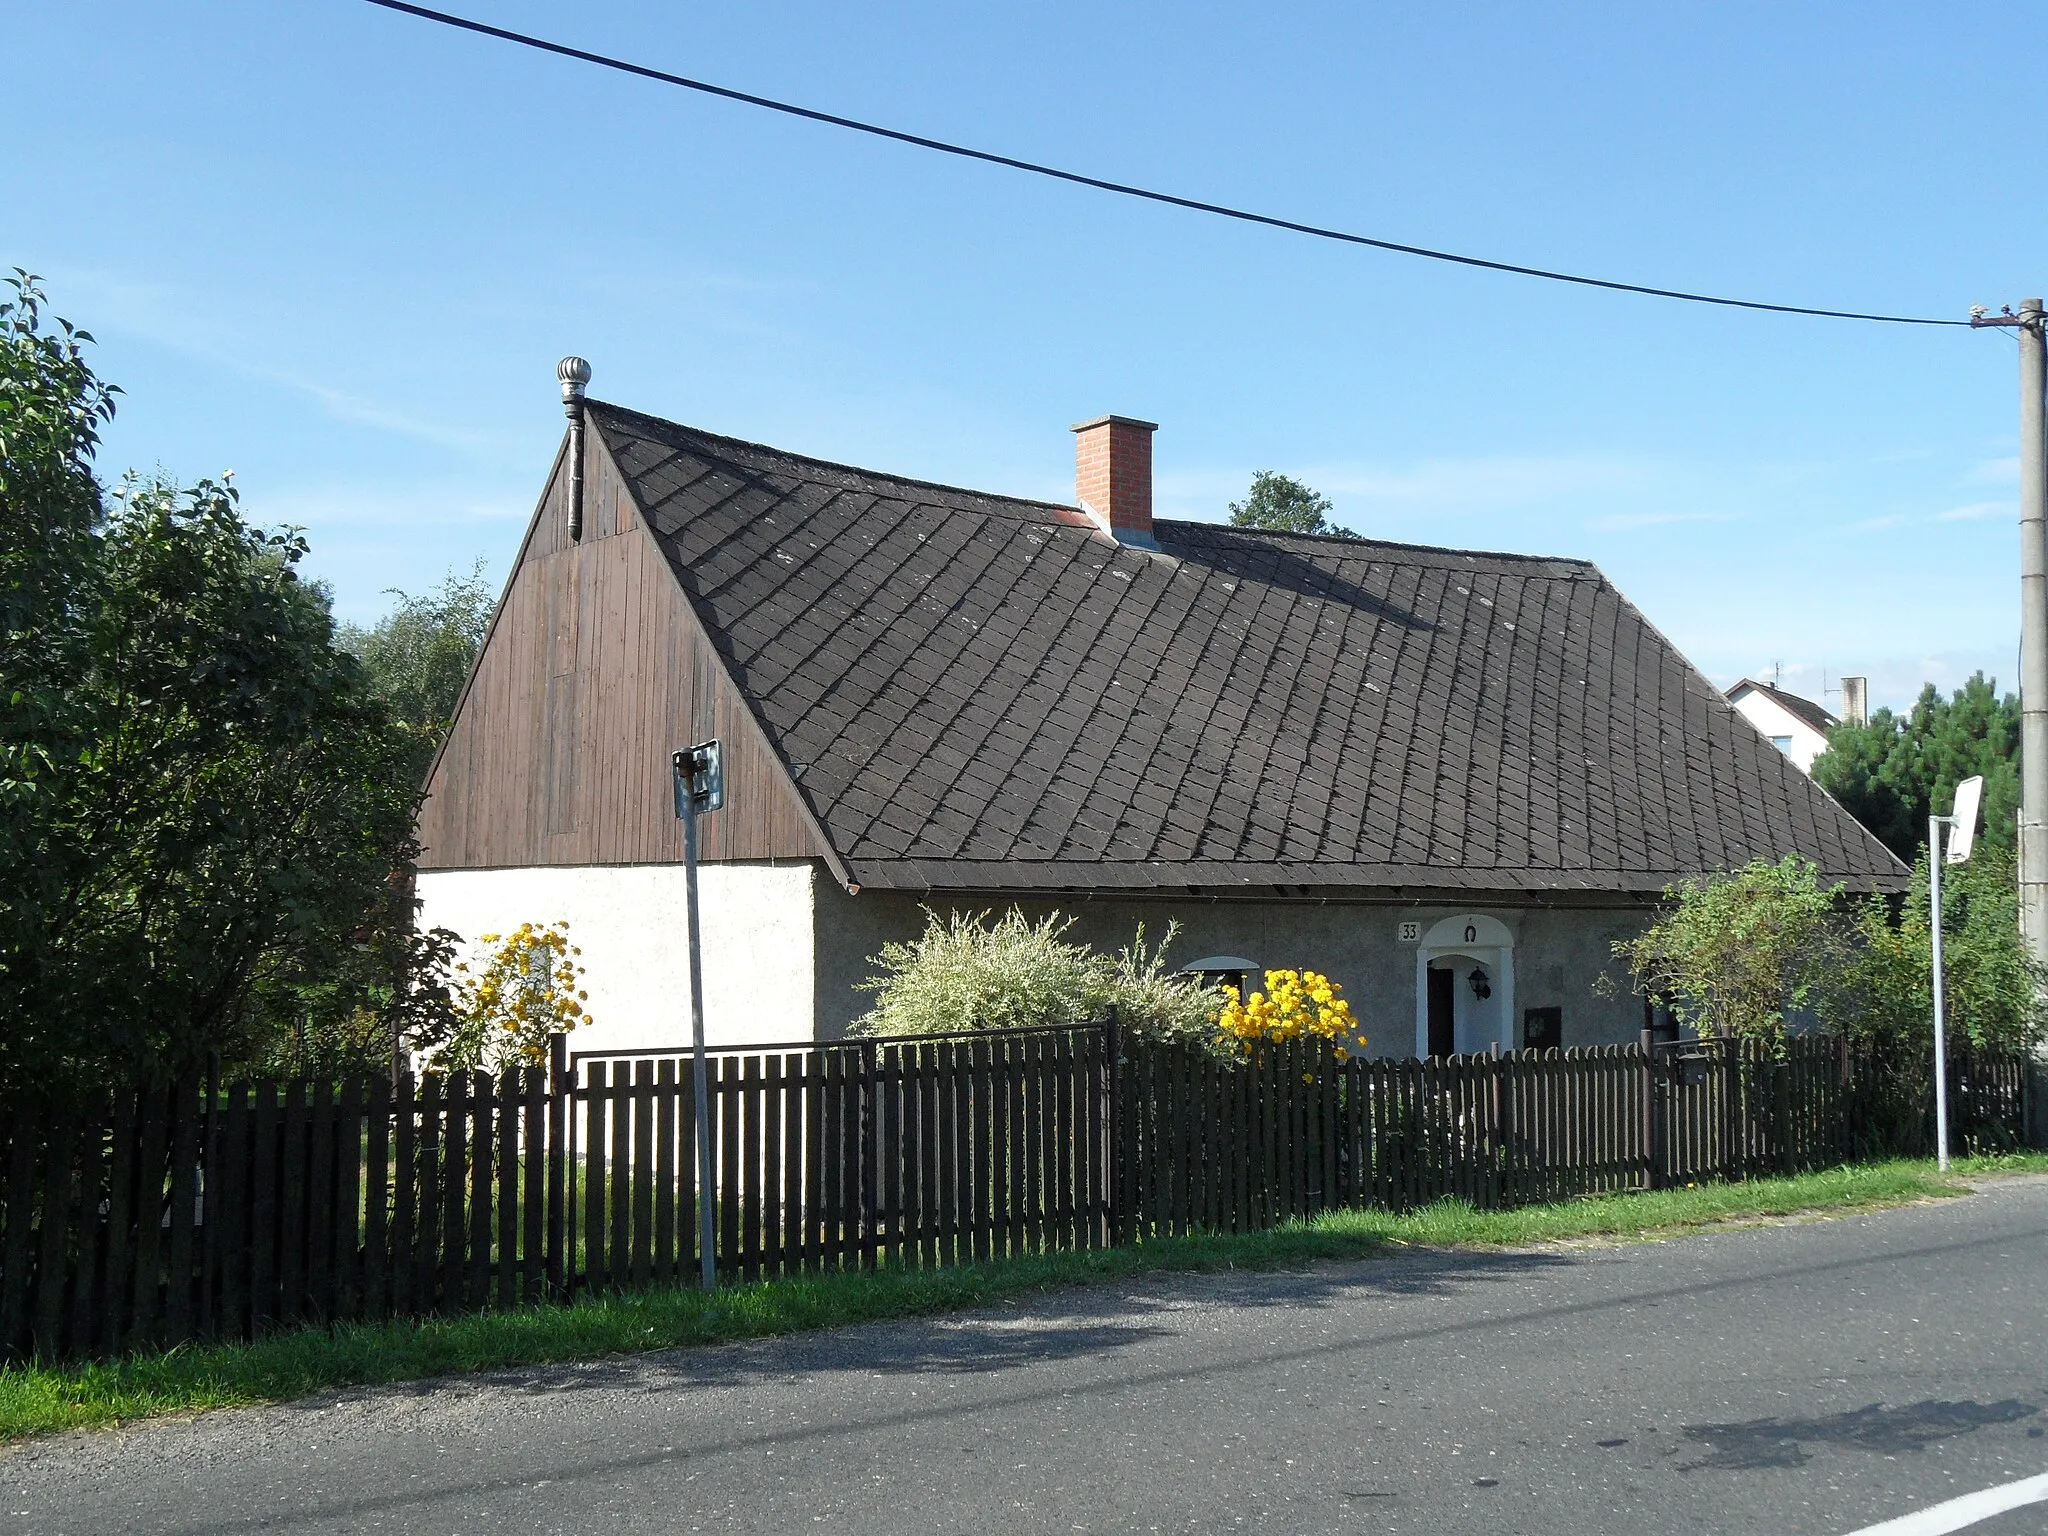 Photo showing: Štipoklasy_(okres_KH)  B. Cuntry House No. 33, Kutná Hora District, the Czech Republic.